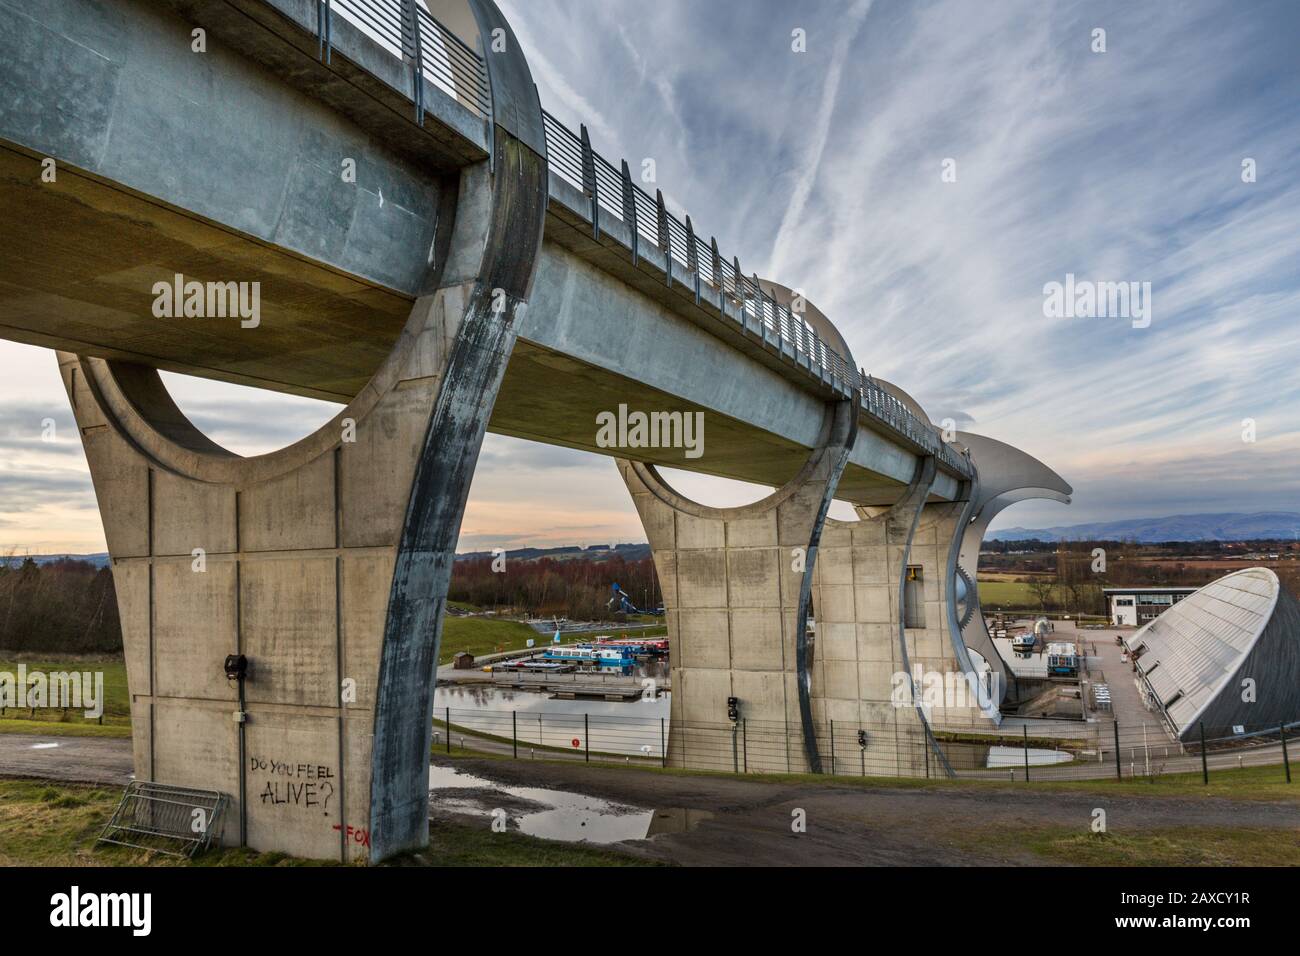 The Falkirk Wheel is a unique rotating boat lift in Scotland, connecting the Forth and Clyde Canal with the Union Canal. It opened in 2002. Stock Photo